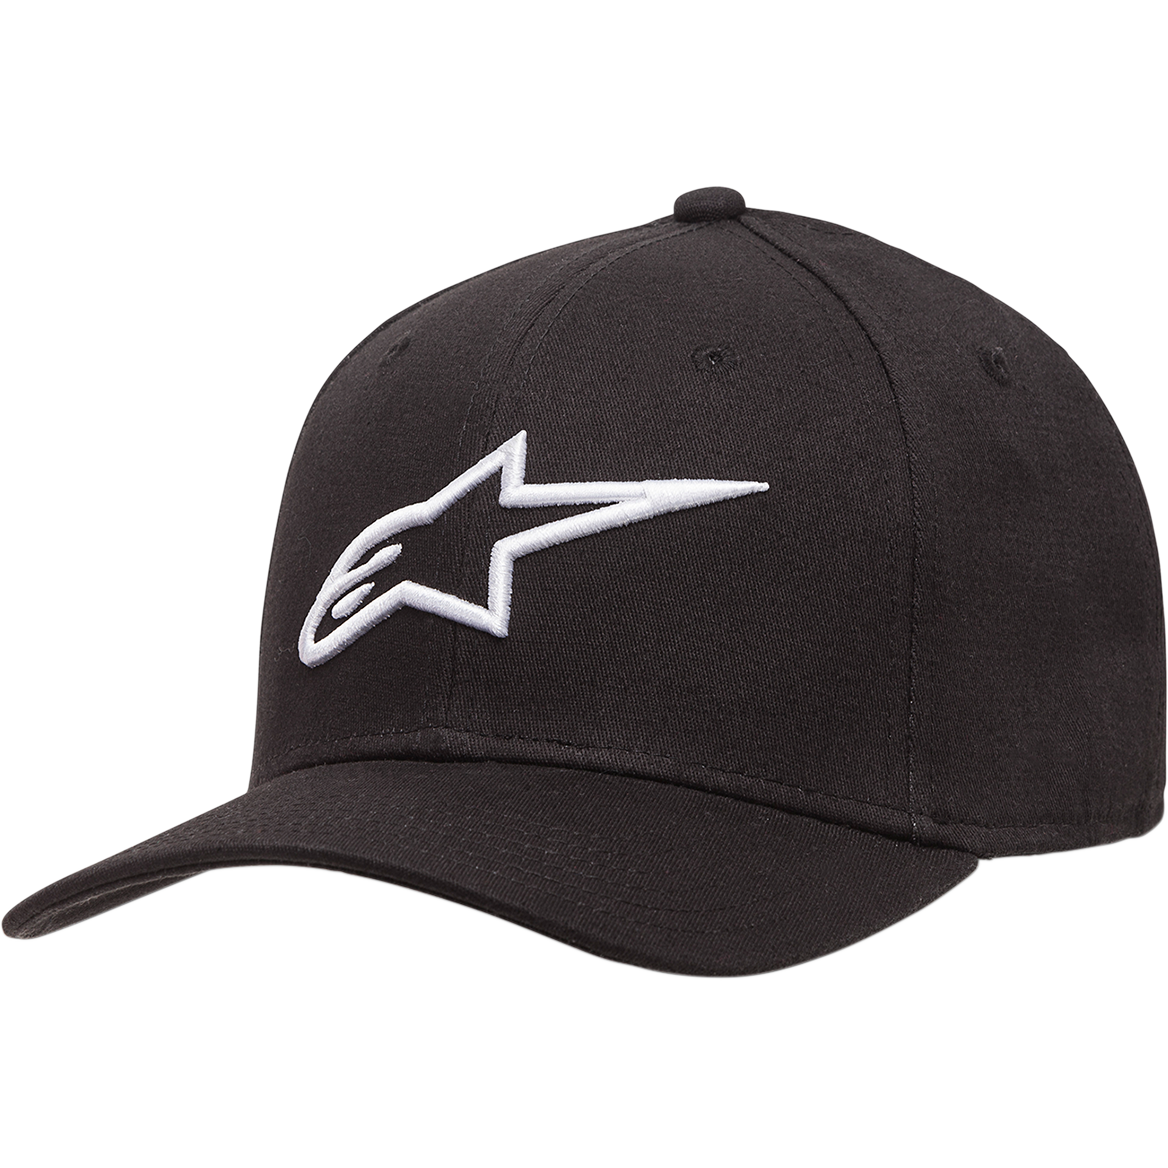 Youth Age Hat